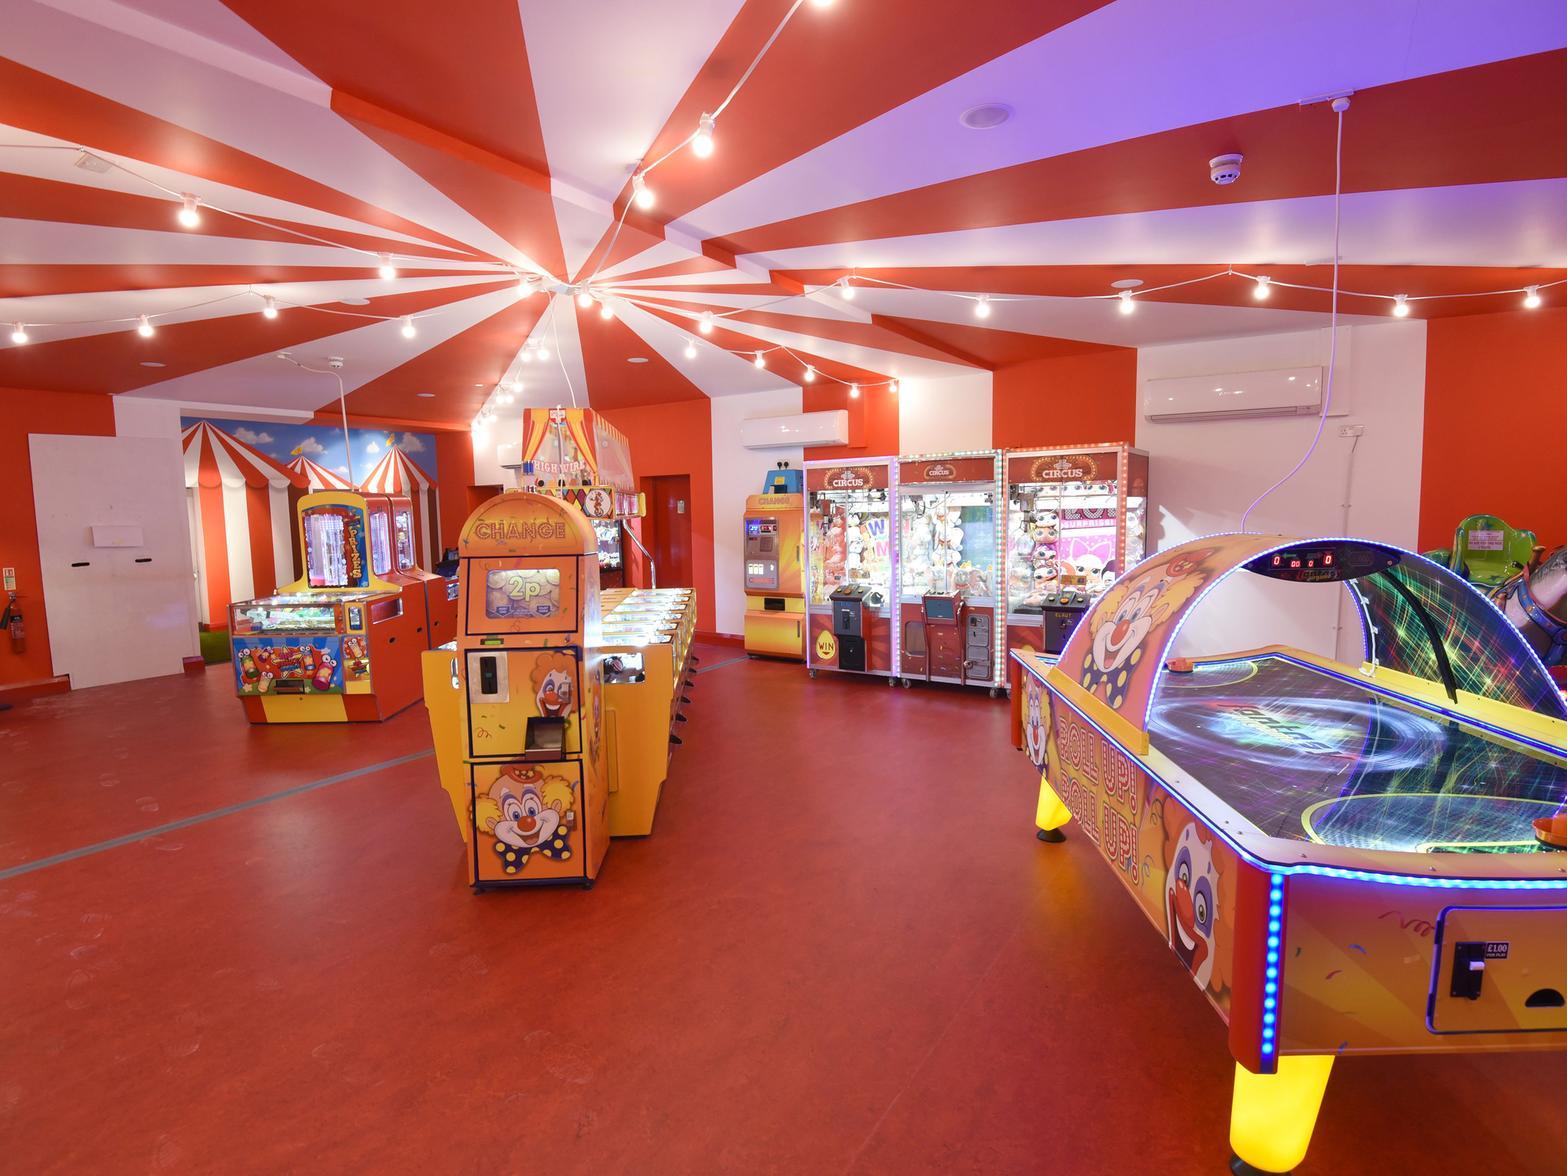 Sadly we had to say a nostalgic farewell to Jungle Jim's in 2019. Following it's overhaul in 2007 it was decided to close the play areain May 2019. The space is now home to The Fifth Floor entertainment complex.